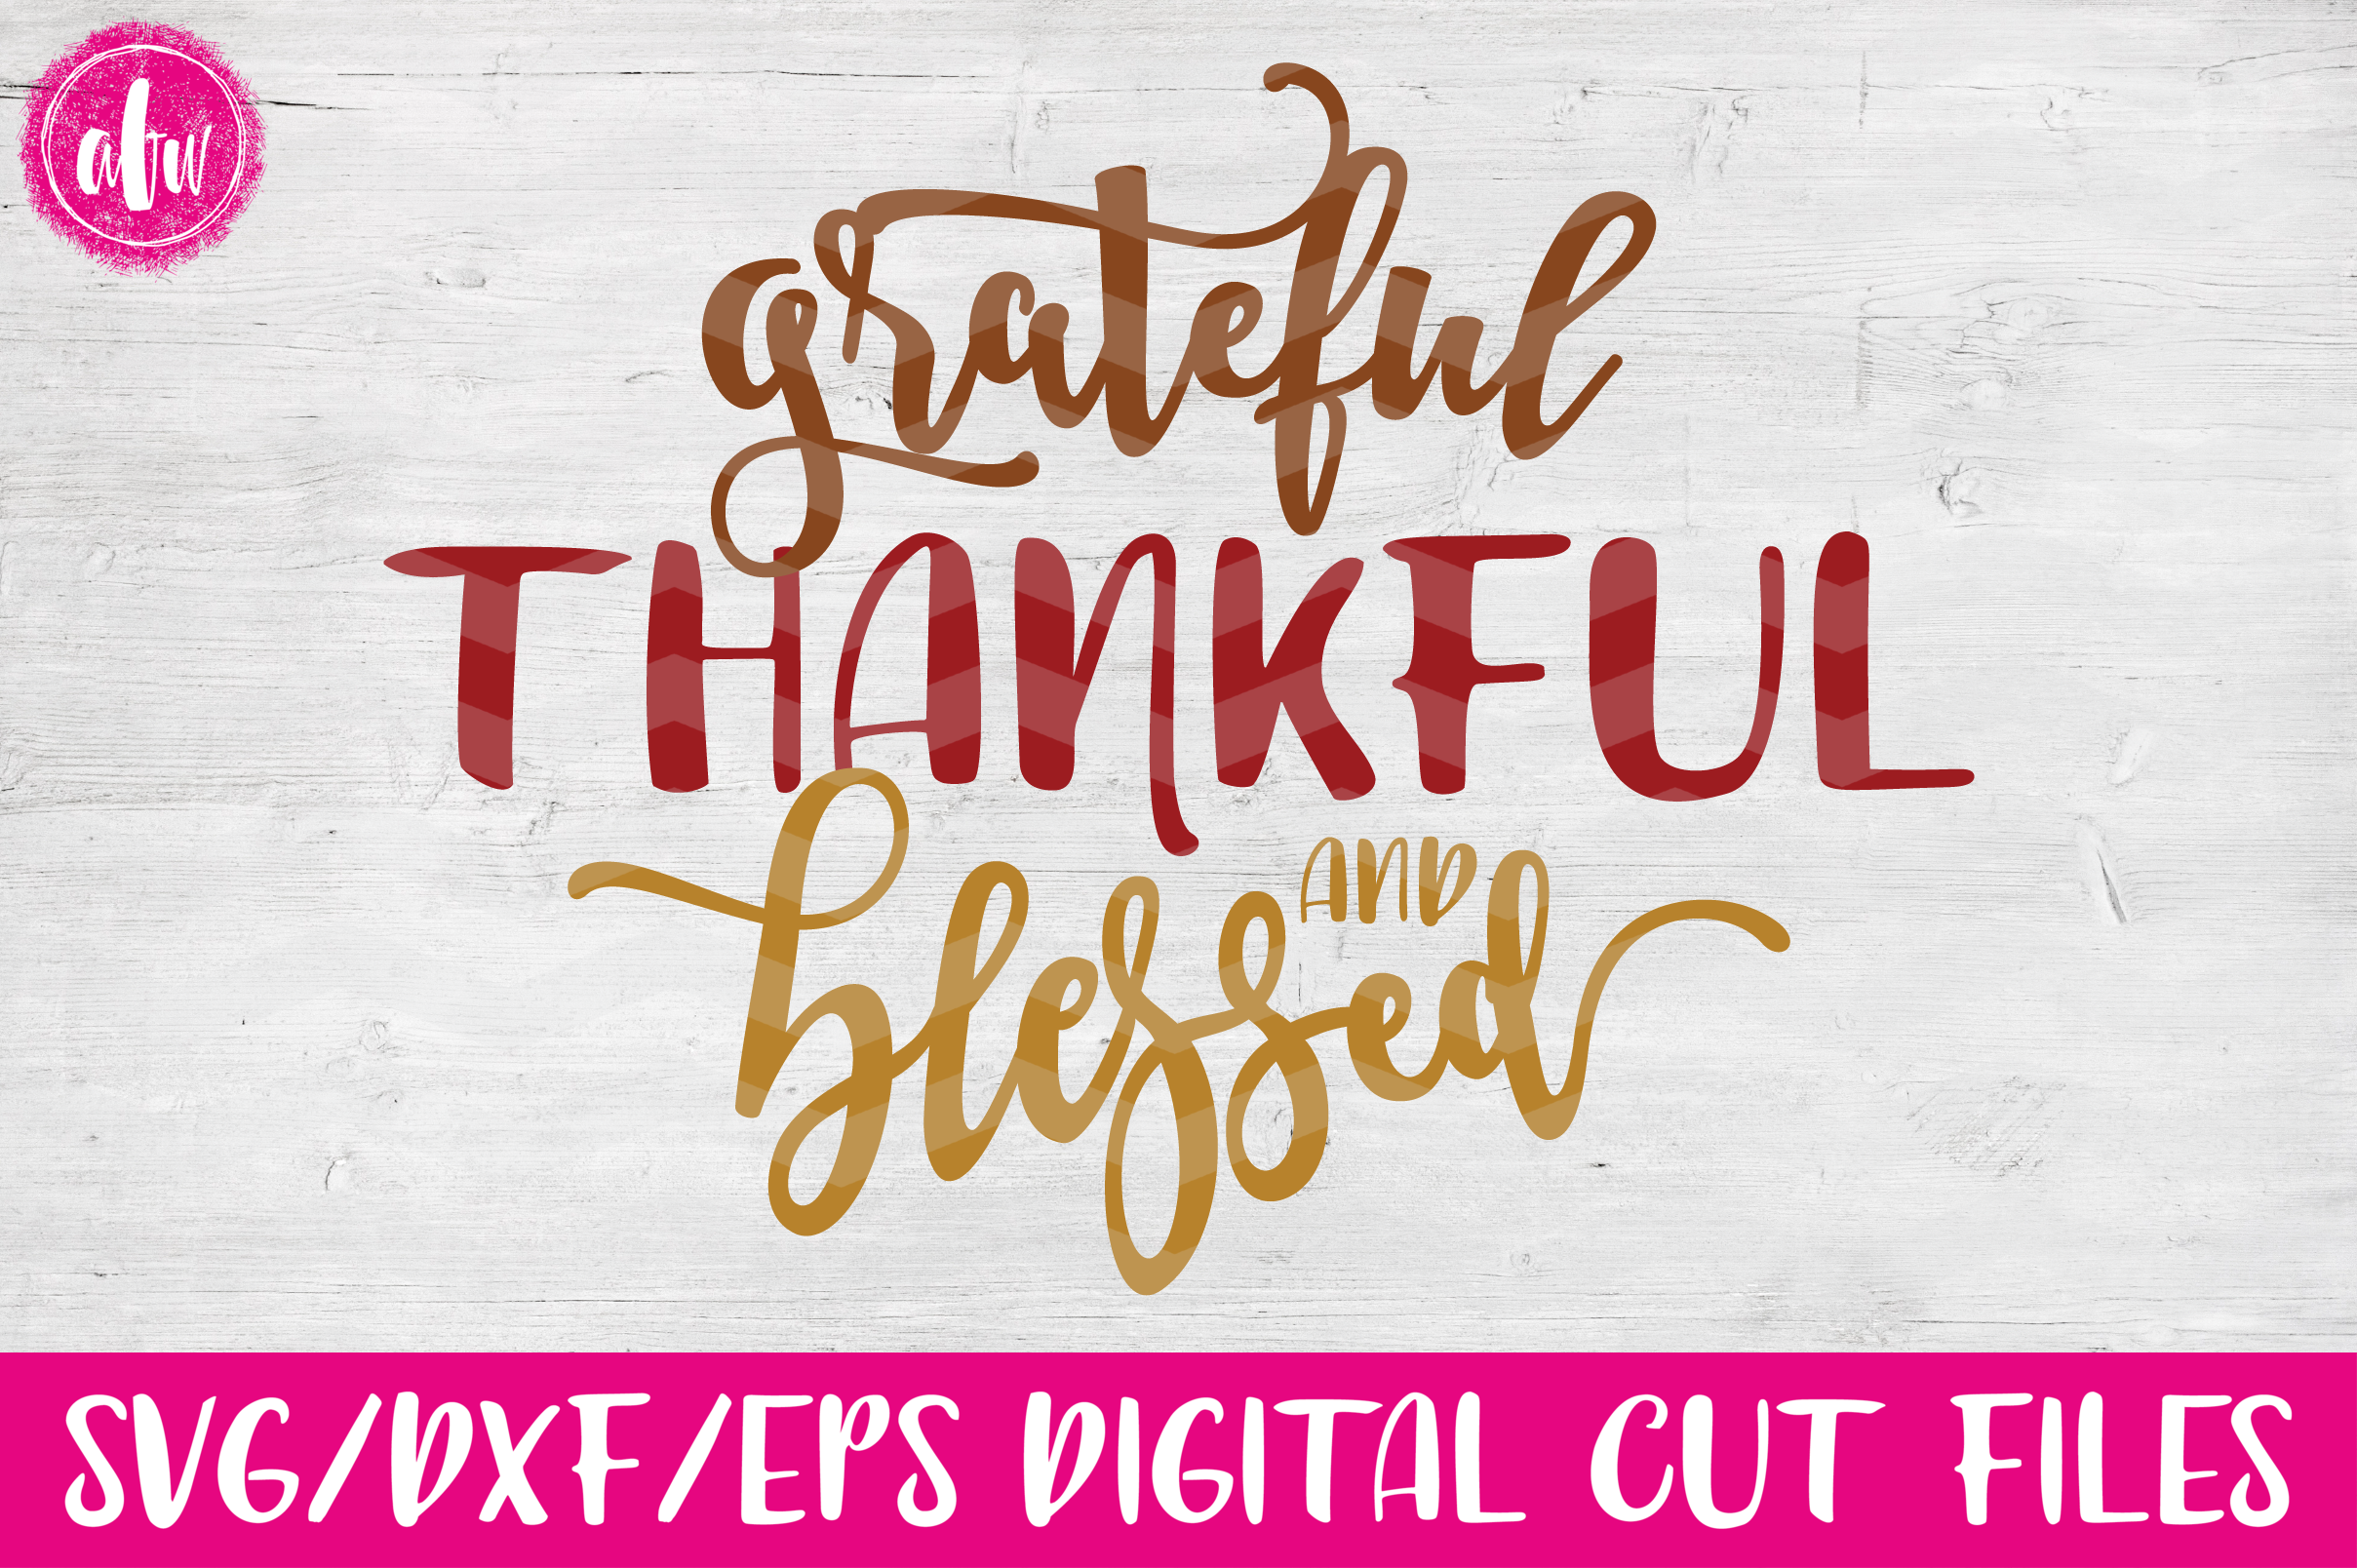 Download Grateful, Thankful, Blessed - SVG, DXF, EPS Cut Files ...